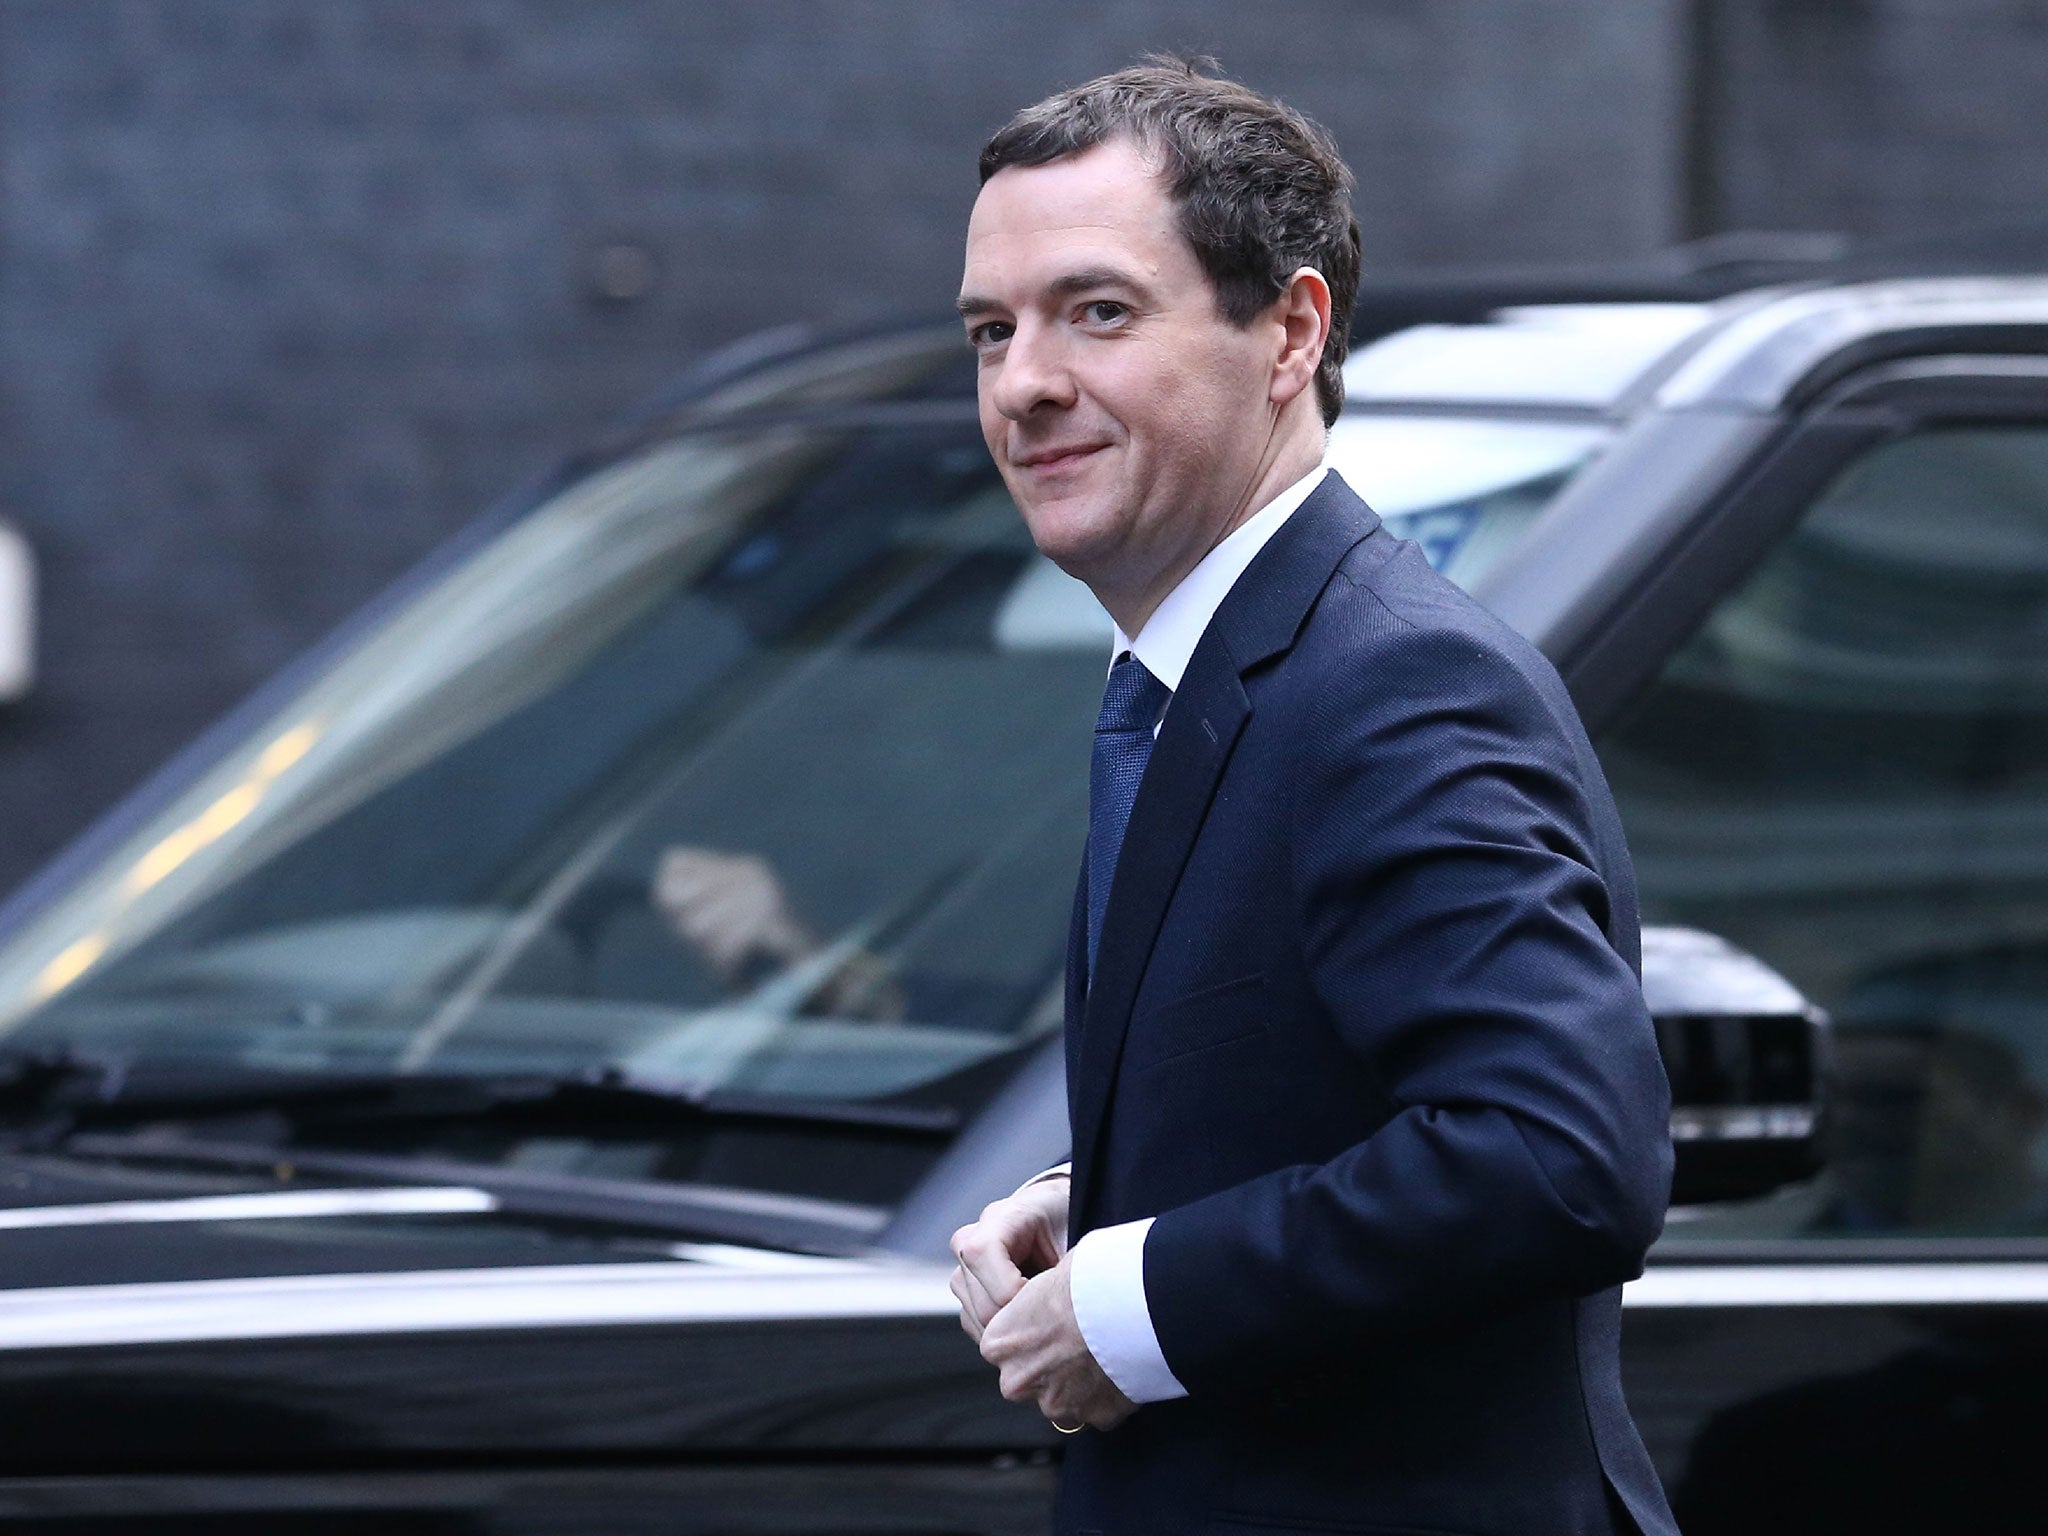 Budget: Spending cuts worth £4 billion and infrastructure spending announcements are expected